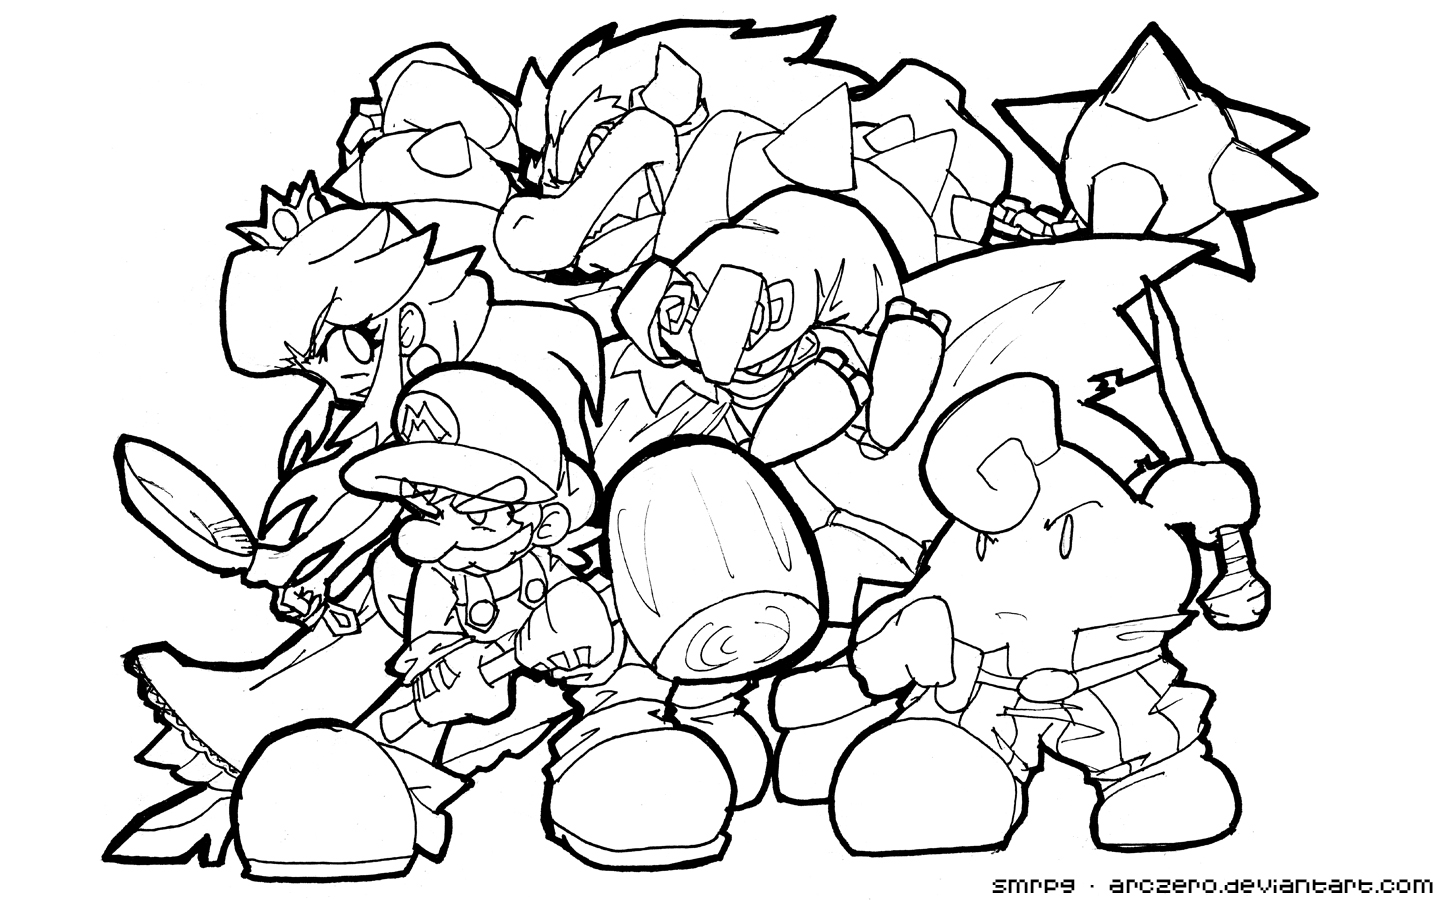 Super Mario Characters Coloring Pages - Get Coloring Pages